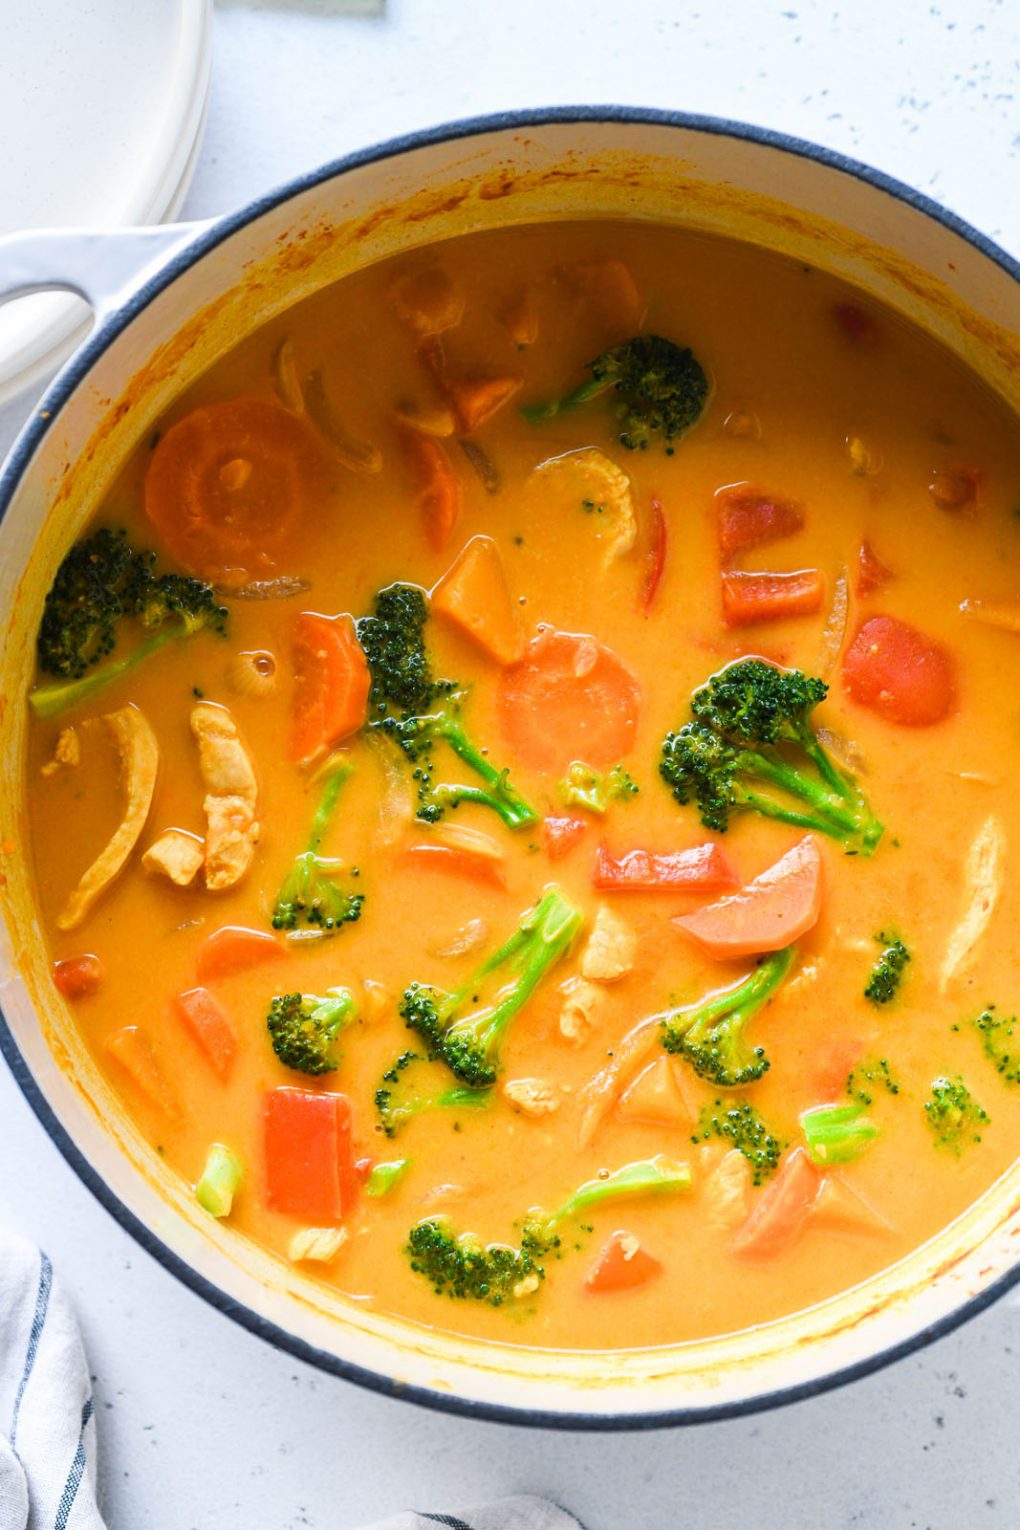 Overhead shot of a large pot full of brothy bright orange pumpkin curry. Curry has sliced carrots, pieces of red pepper, broccoli, and chicken in it.